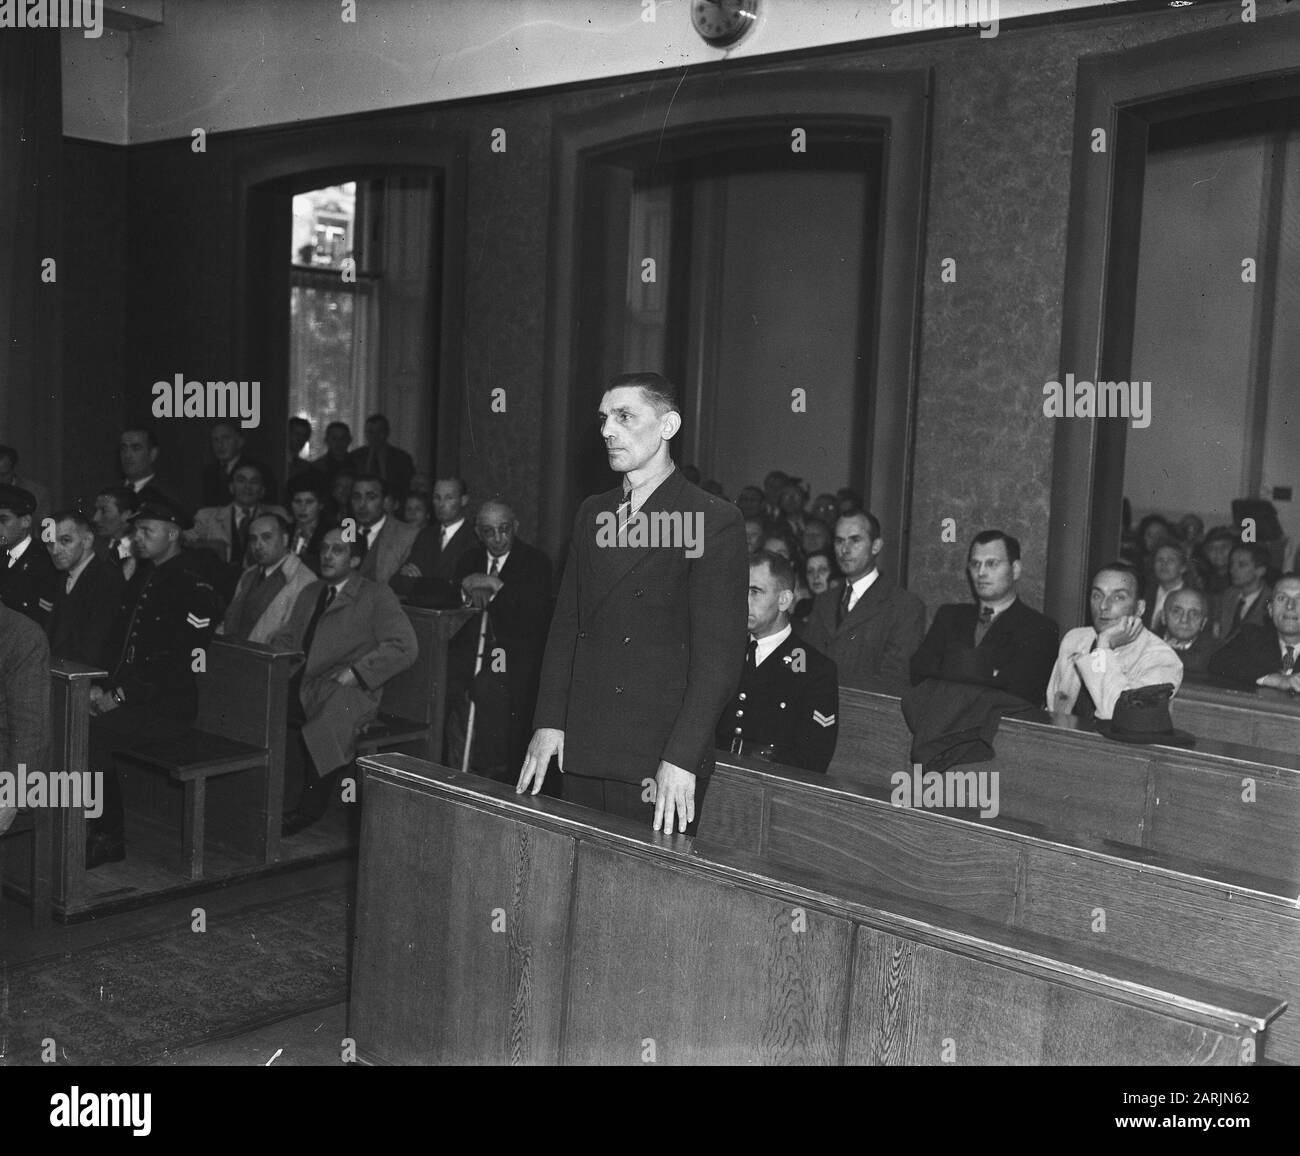 Sam Oly in the accused bank Date: October 3, 1947 Keywords: accused banks Personal name: Sam Oly Stock Photo